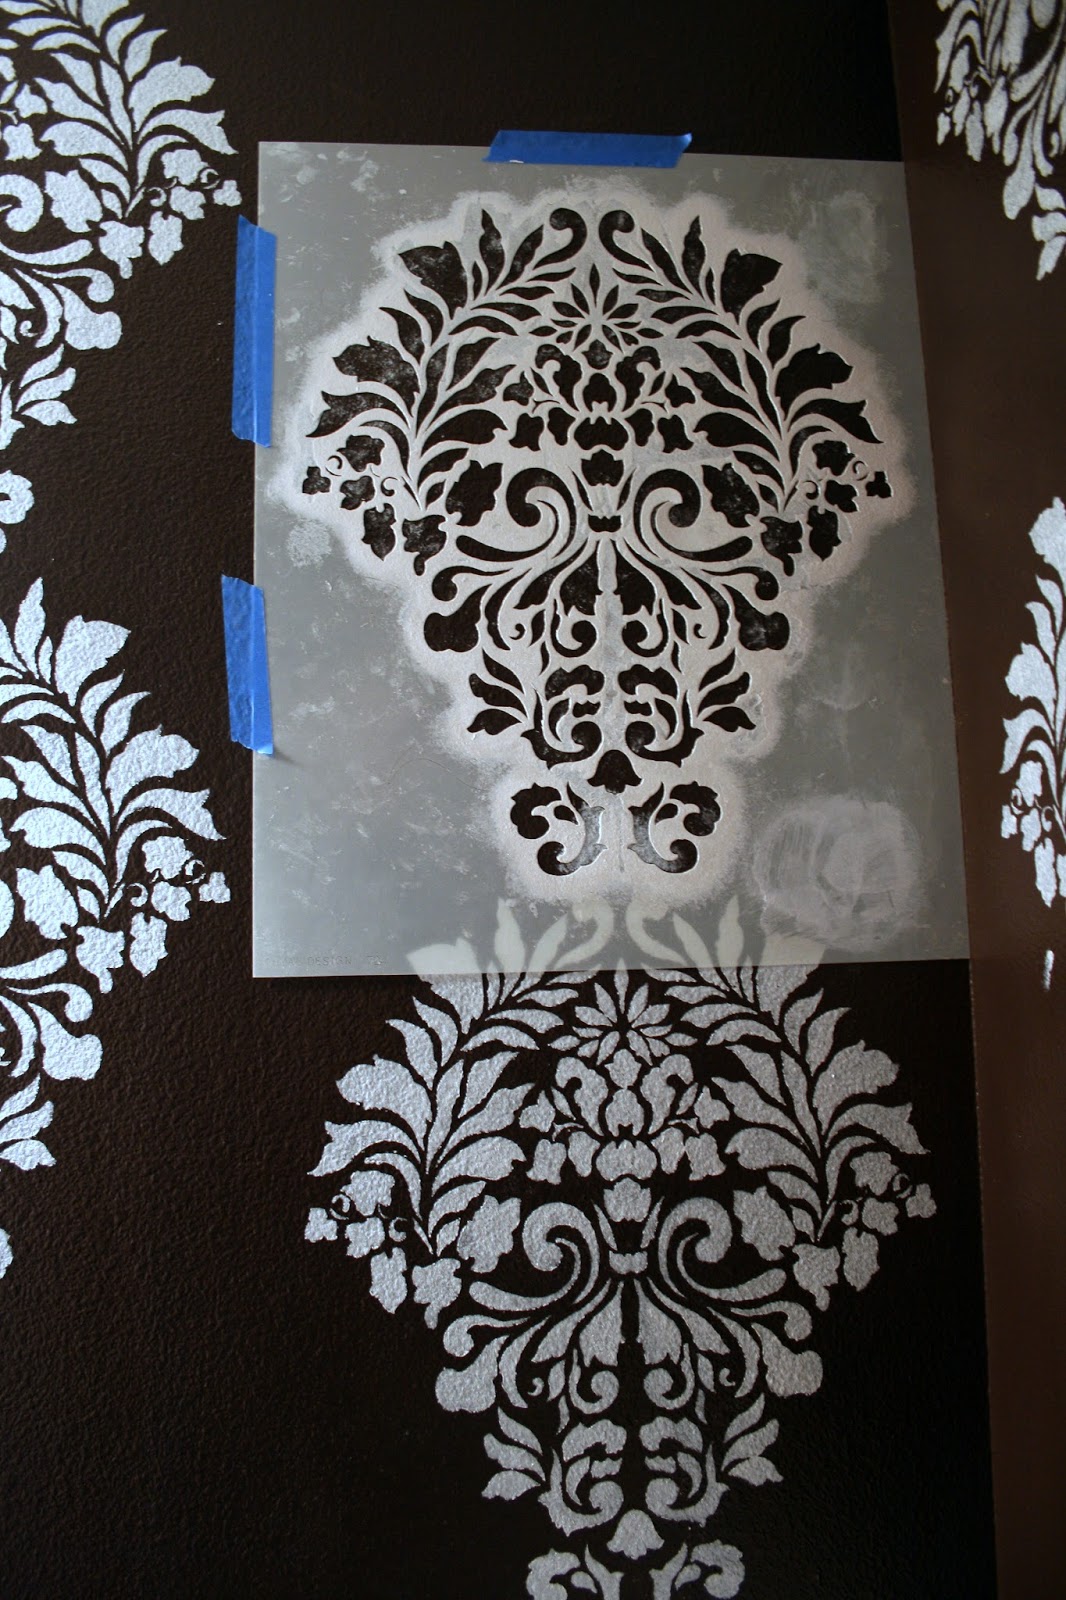 Tips to using Adhesive Stencils!